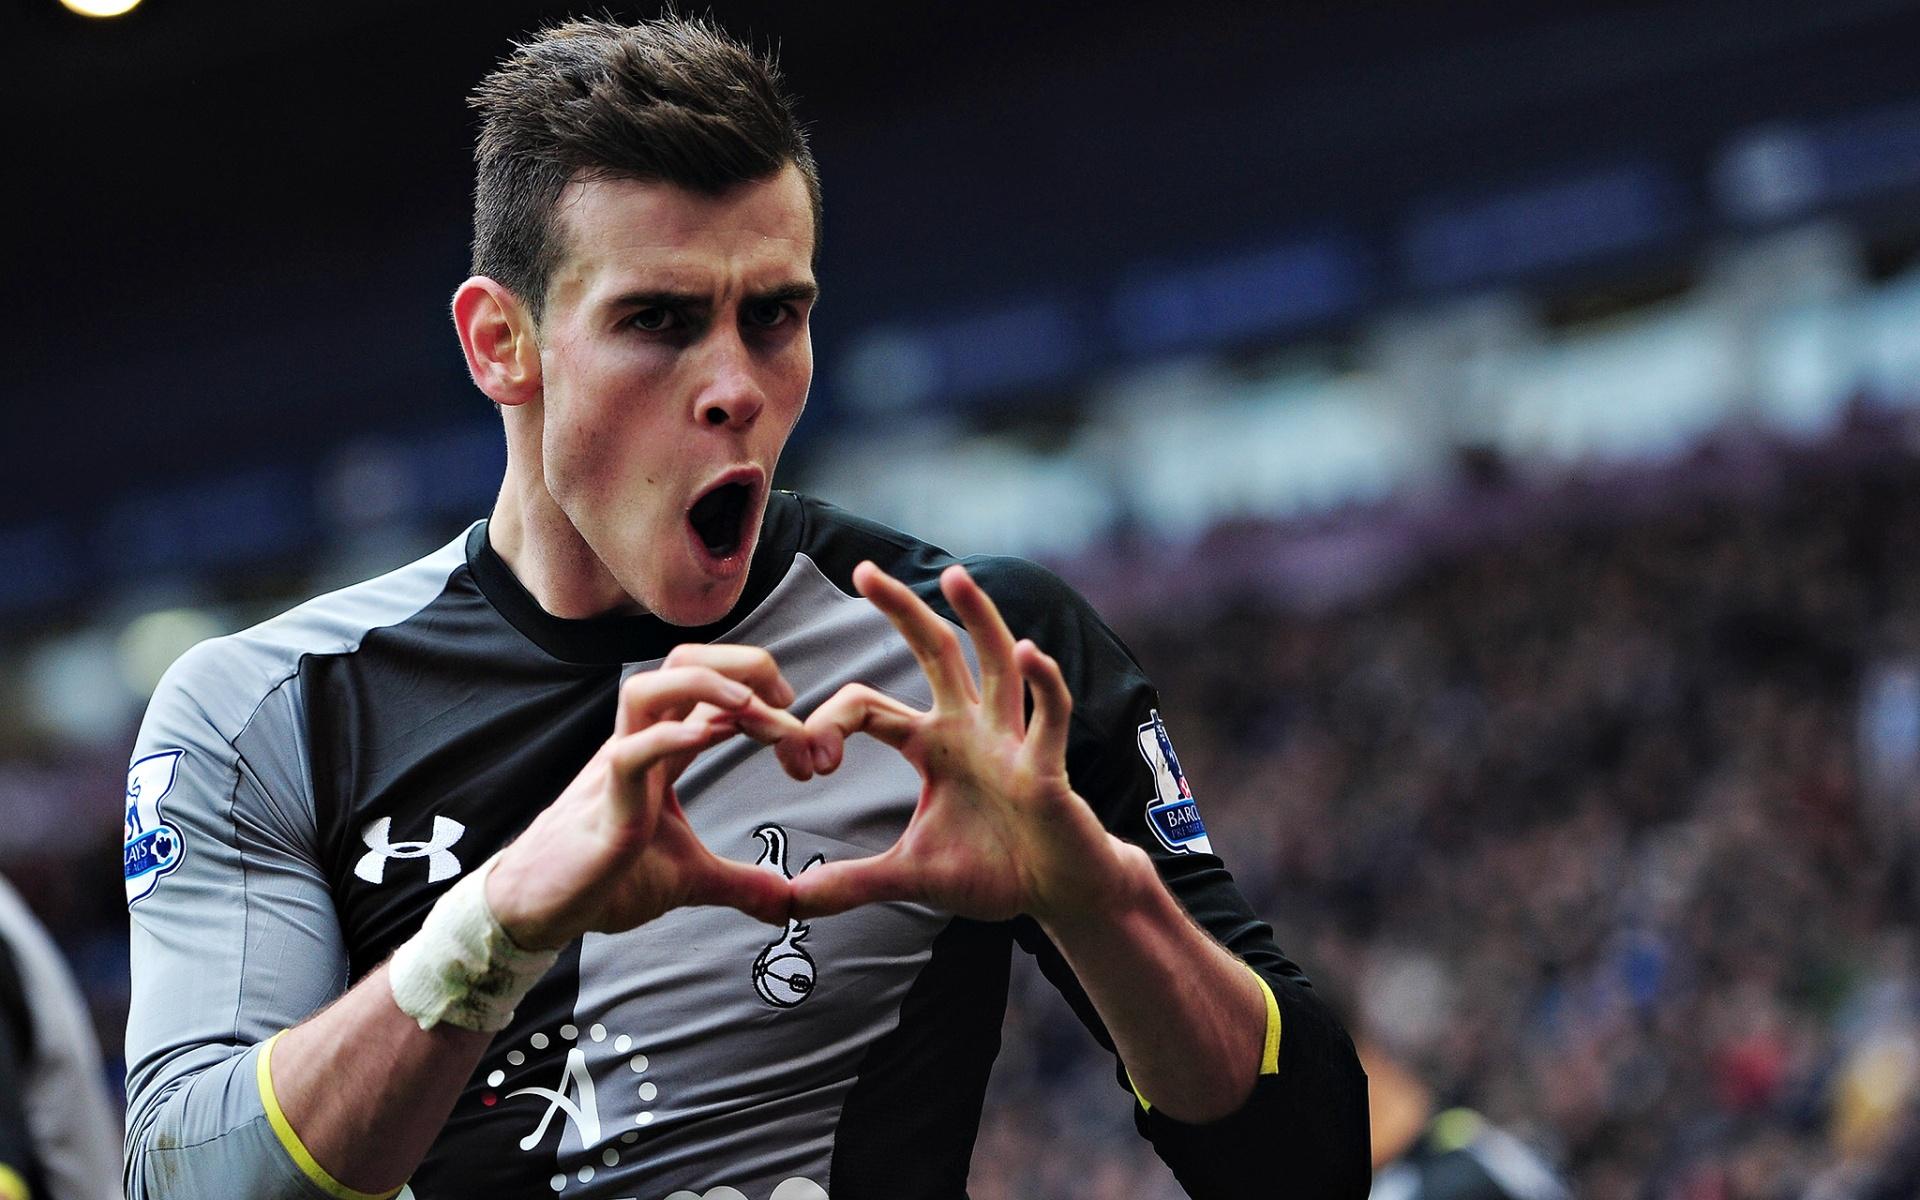 Get 45 Gareth Bale Wallpaper & Picture Only For you